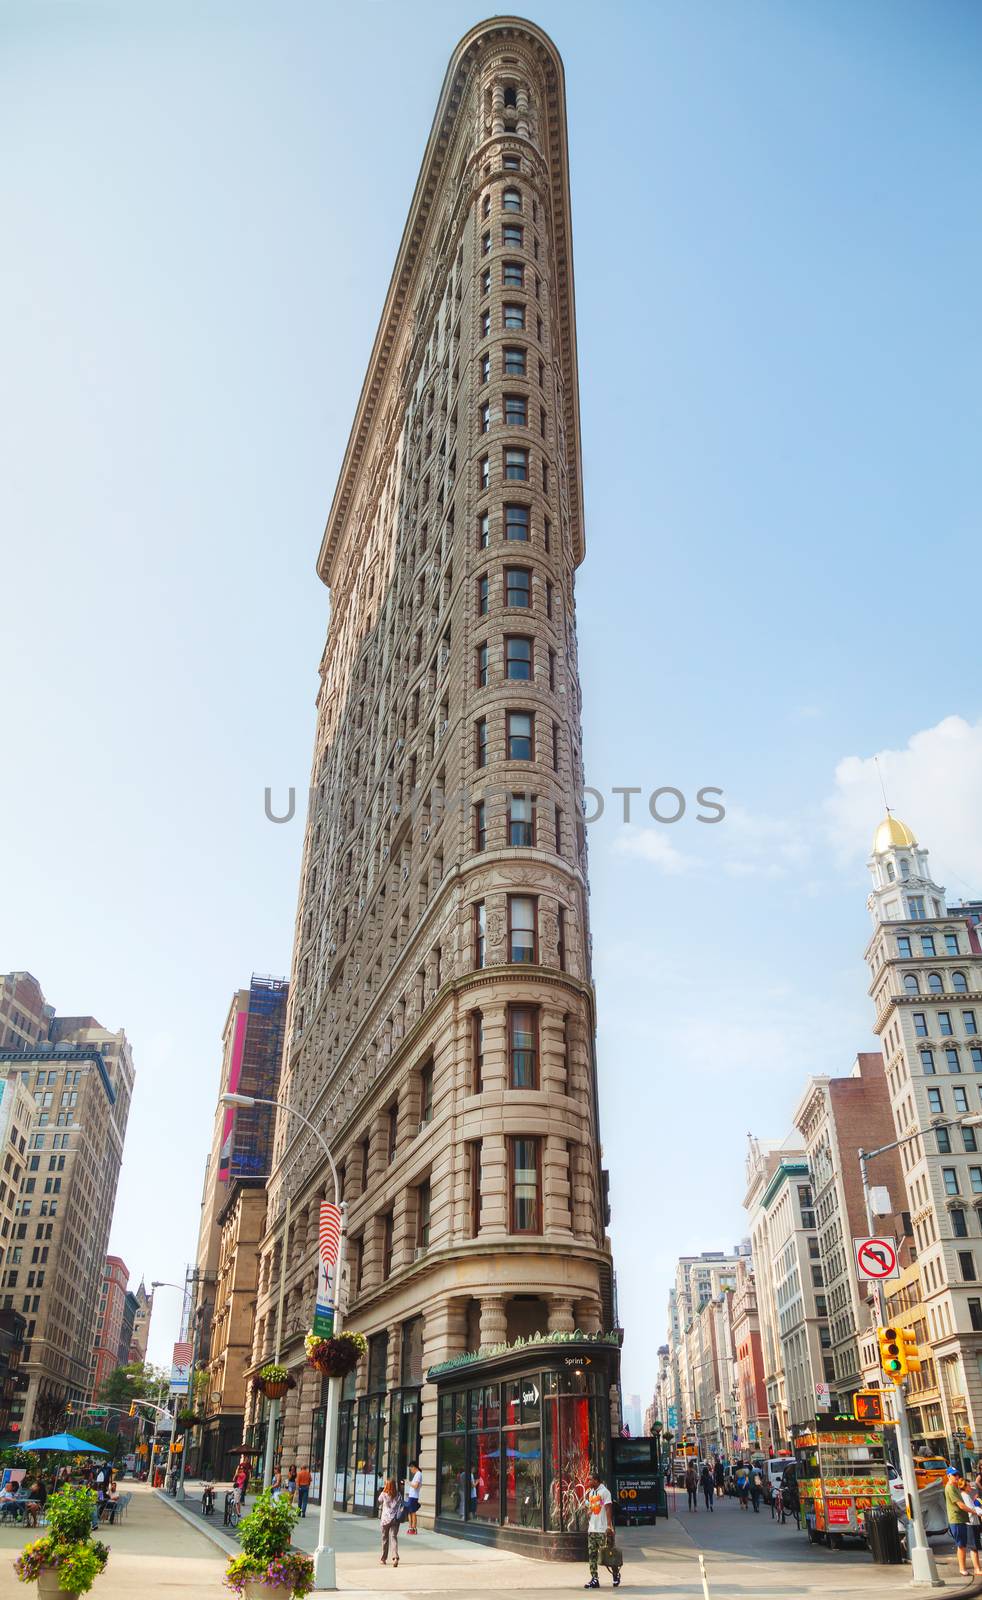 NEW YORK CITY - September 4: Flatiron Building on September 4, 2015 in New York. It's located at 175 Fifth Avenue in the borough of Manhattan and is considered to be a groundbreaking skyscraper.